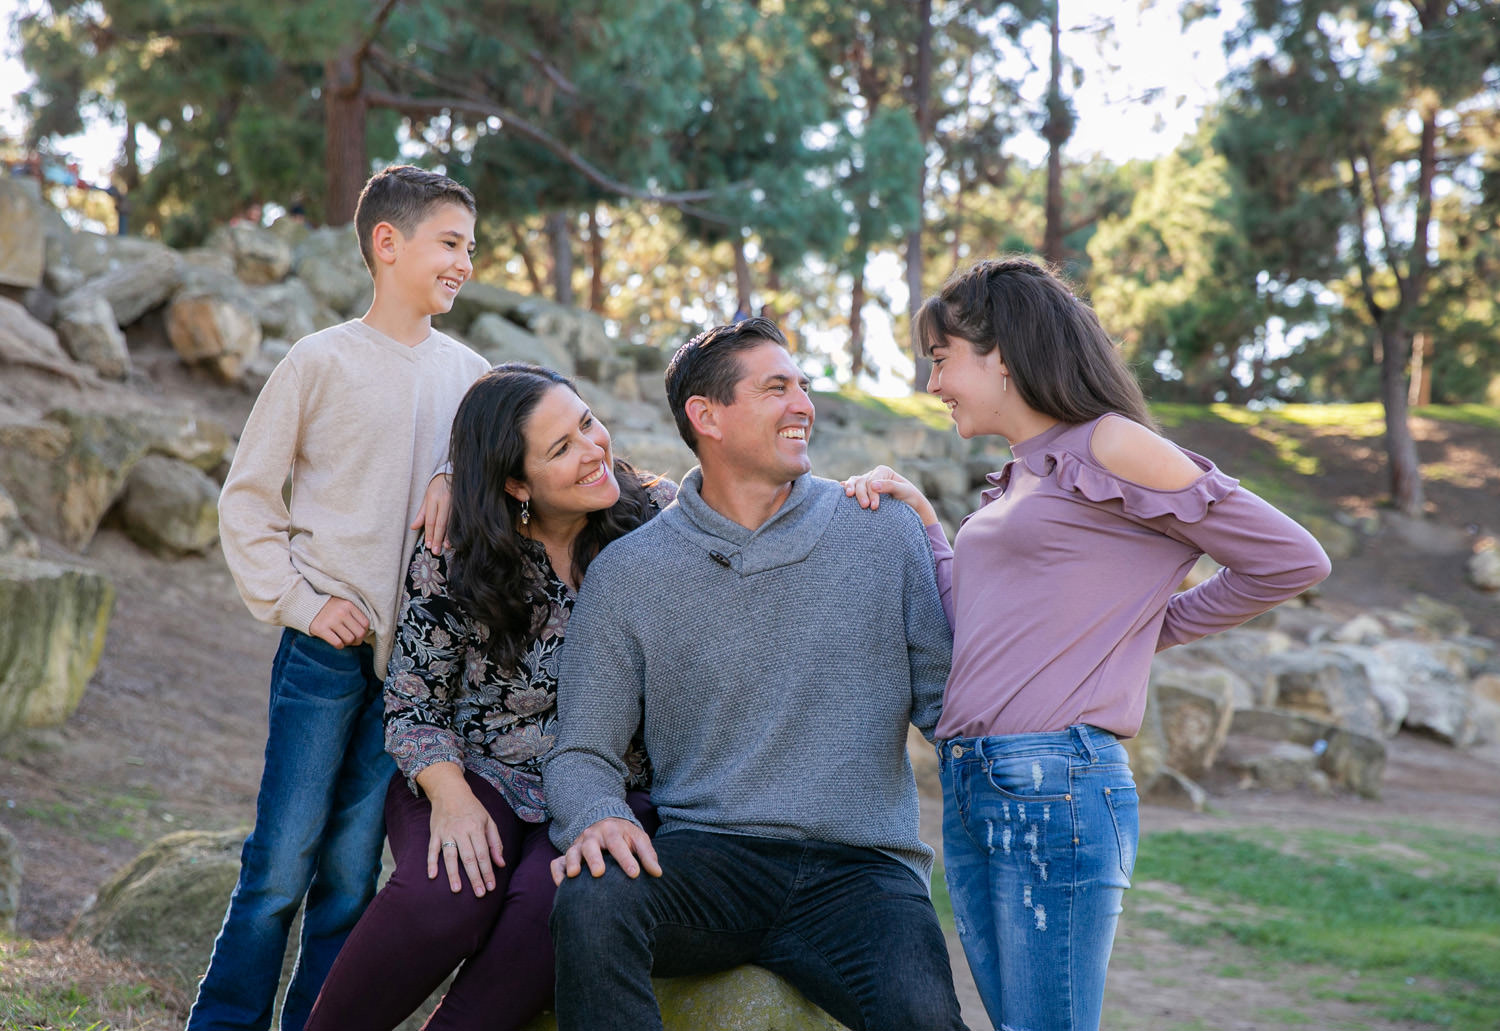 10 Essential Dos and Don’ts for Family Portrait Photography￼